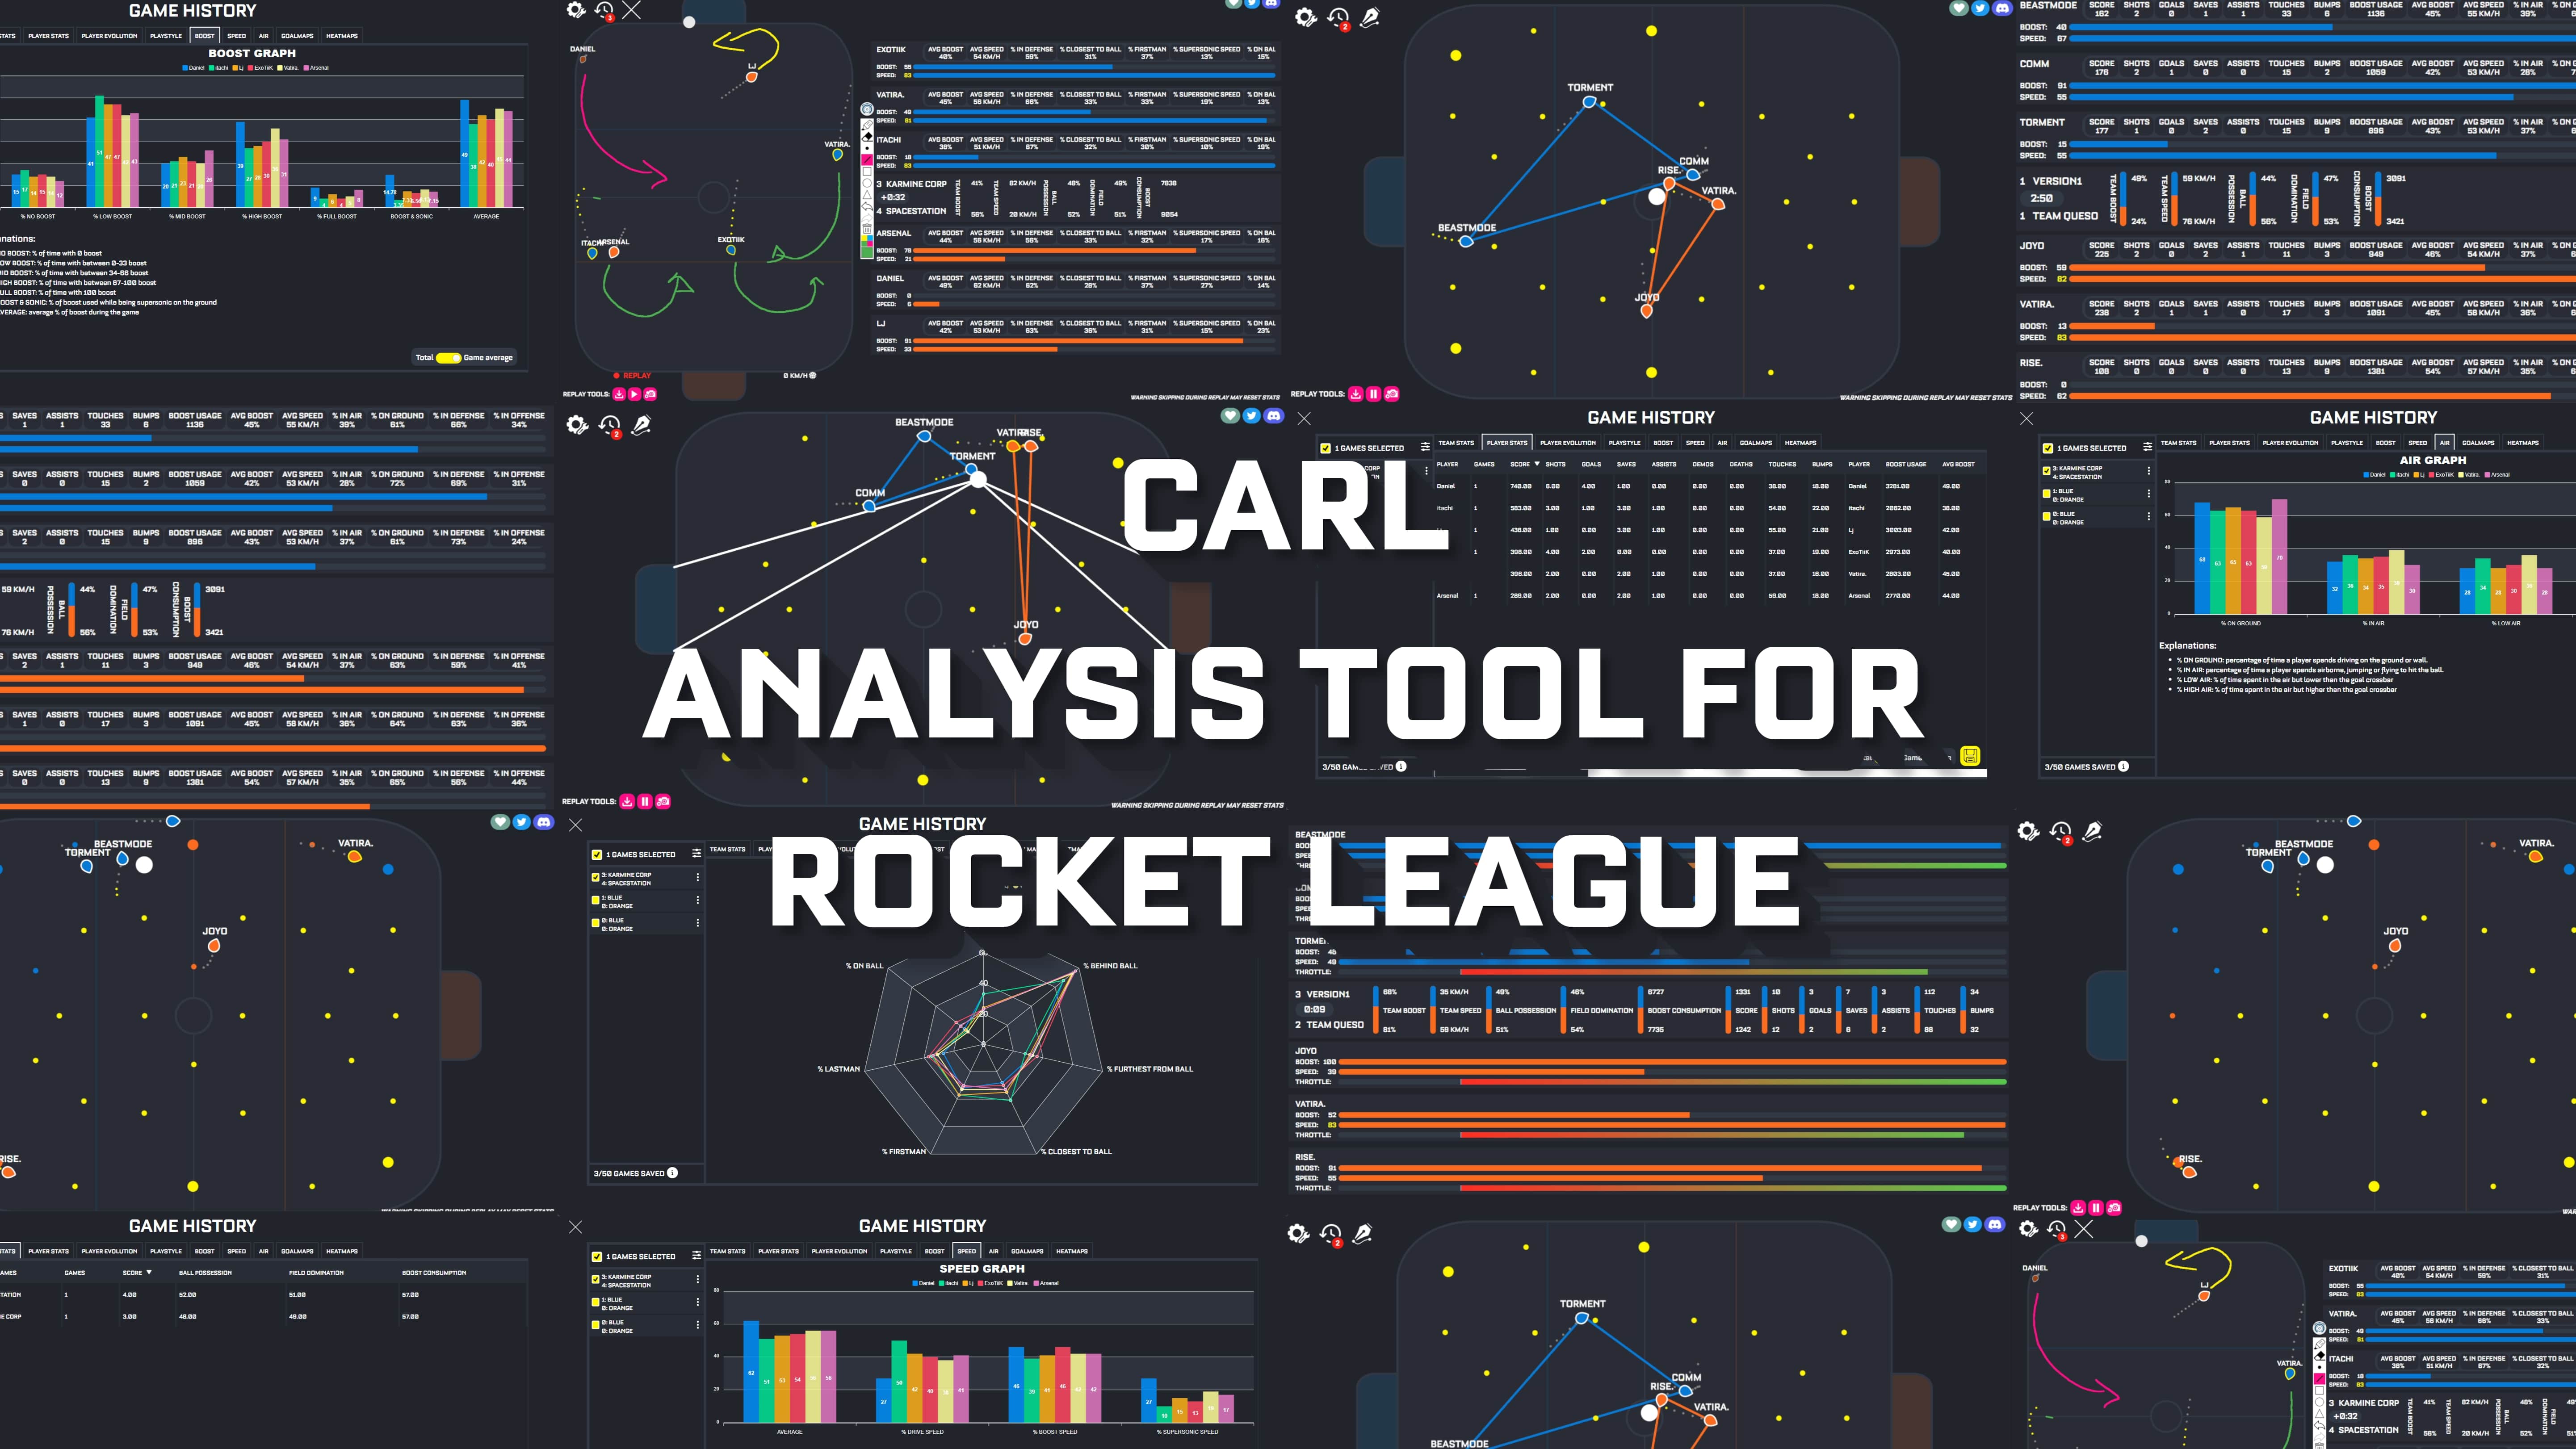 Analysis tool for Rocket League